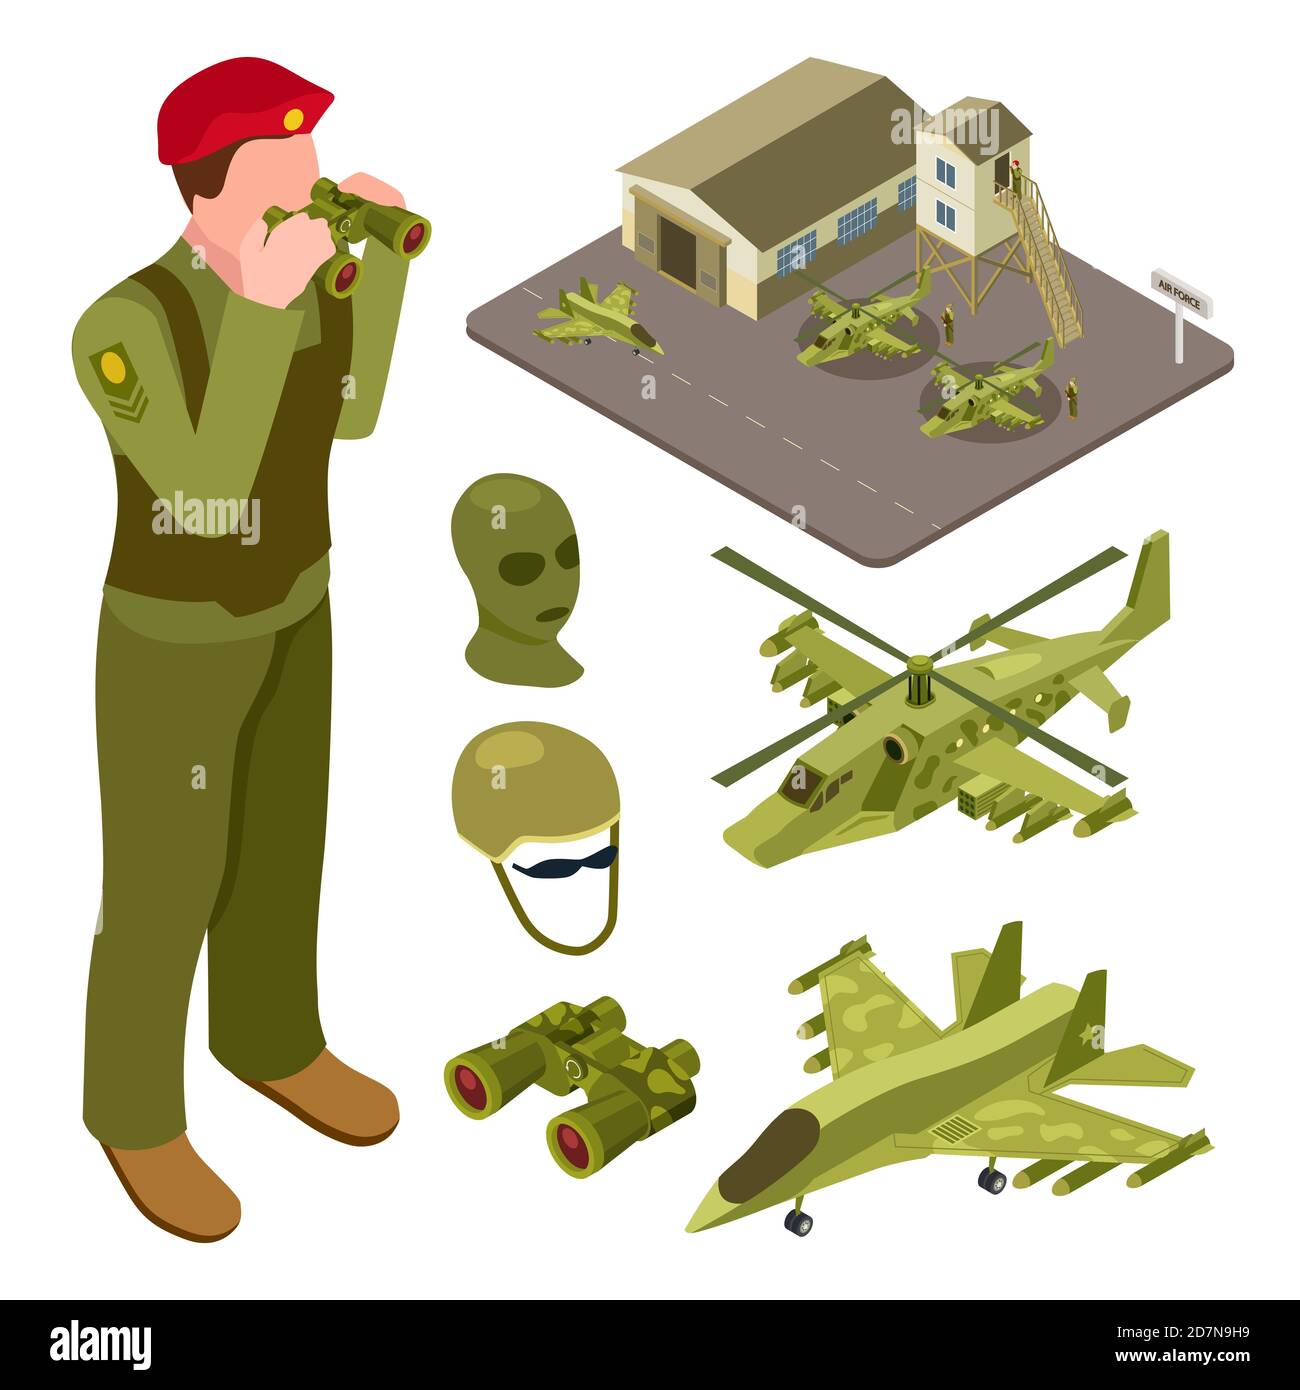 Military air force base isometric with helicopter, fighter aircraft, soldiers vector illustration. Isometric airplane military and air defense Stock Vector